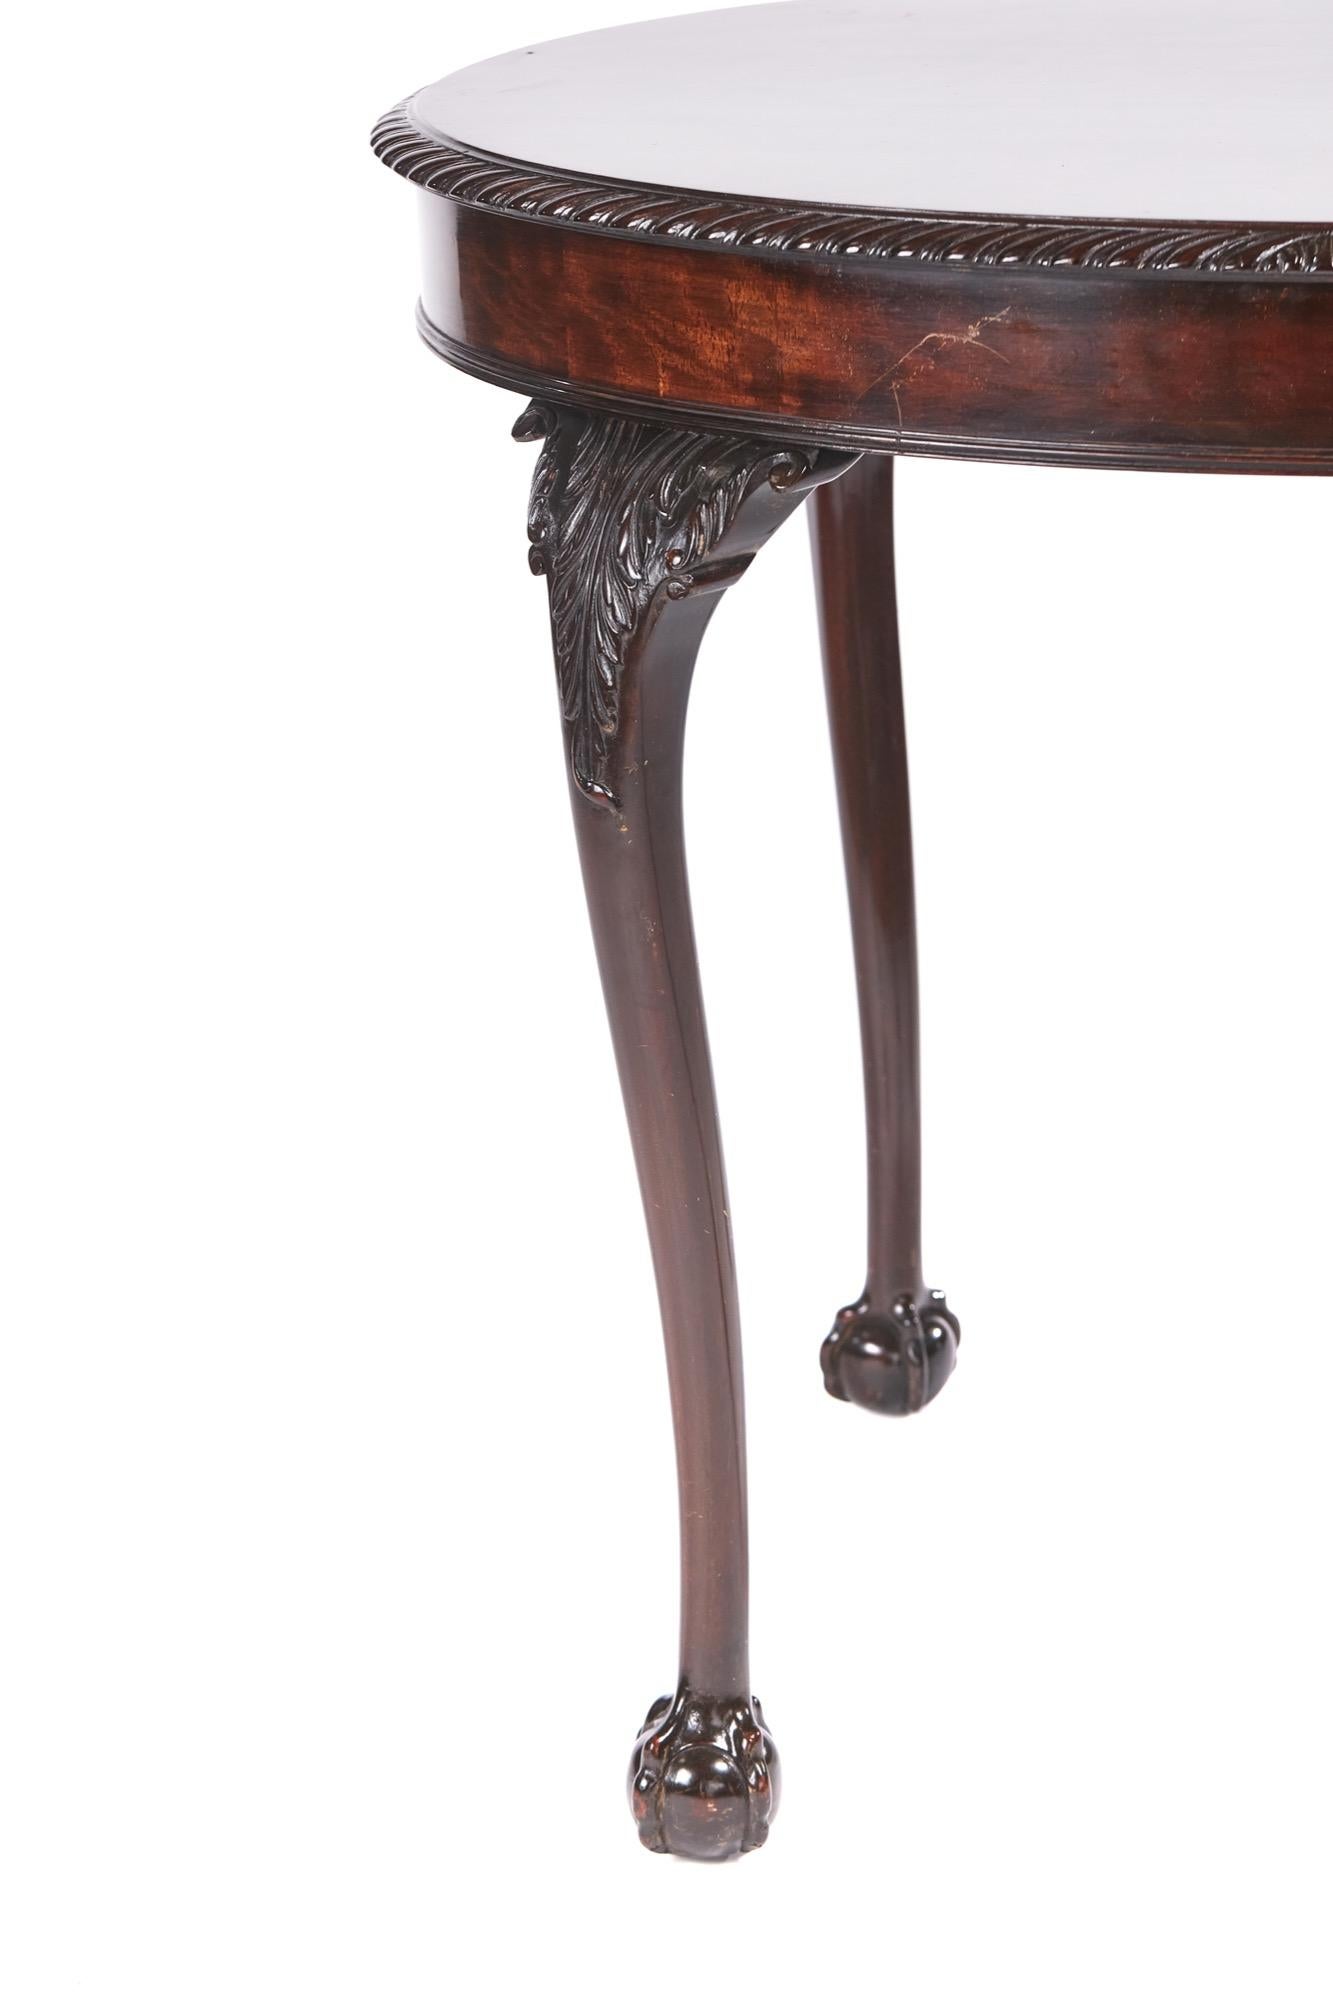 This is a 19th century antique oval carved mahogany centre table with a very attractive figured mahogany top and carved moulded edge. It is standing on four lovely carved claw and ball legs.

WORLDWIDE SHIPPING

We are able to ship this item